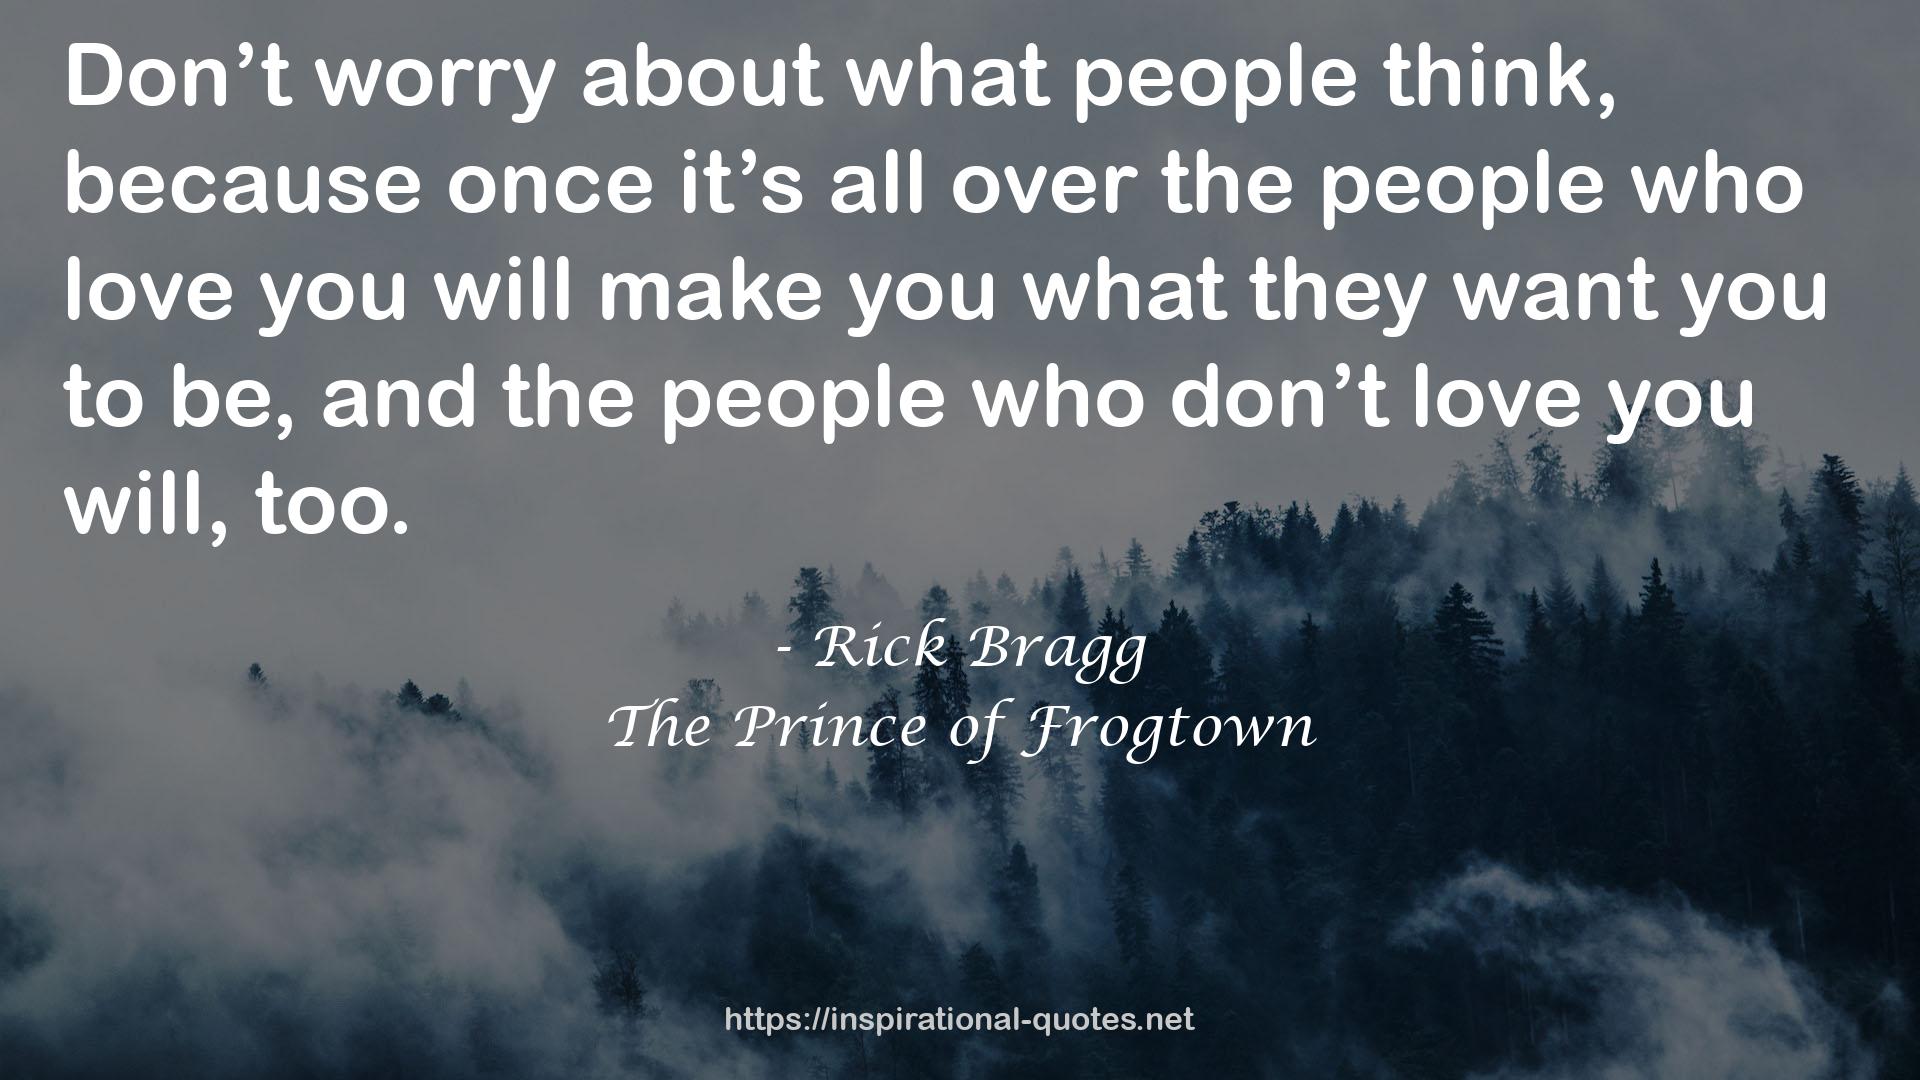 The Prince of Frogtown QUOTES